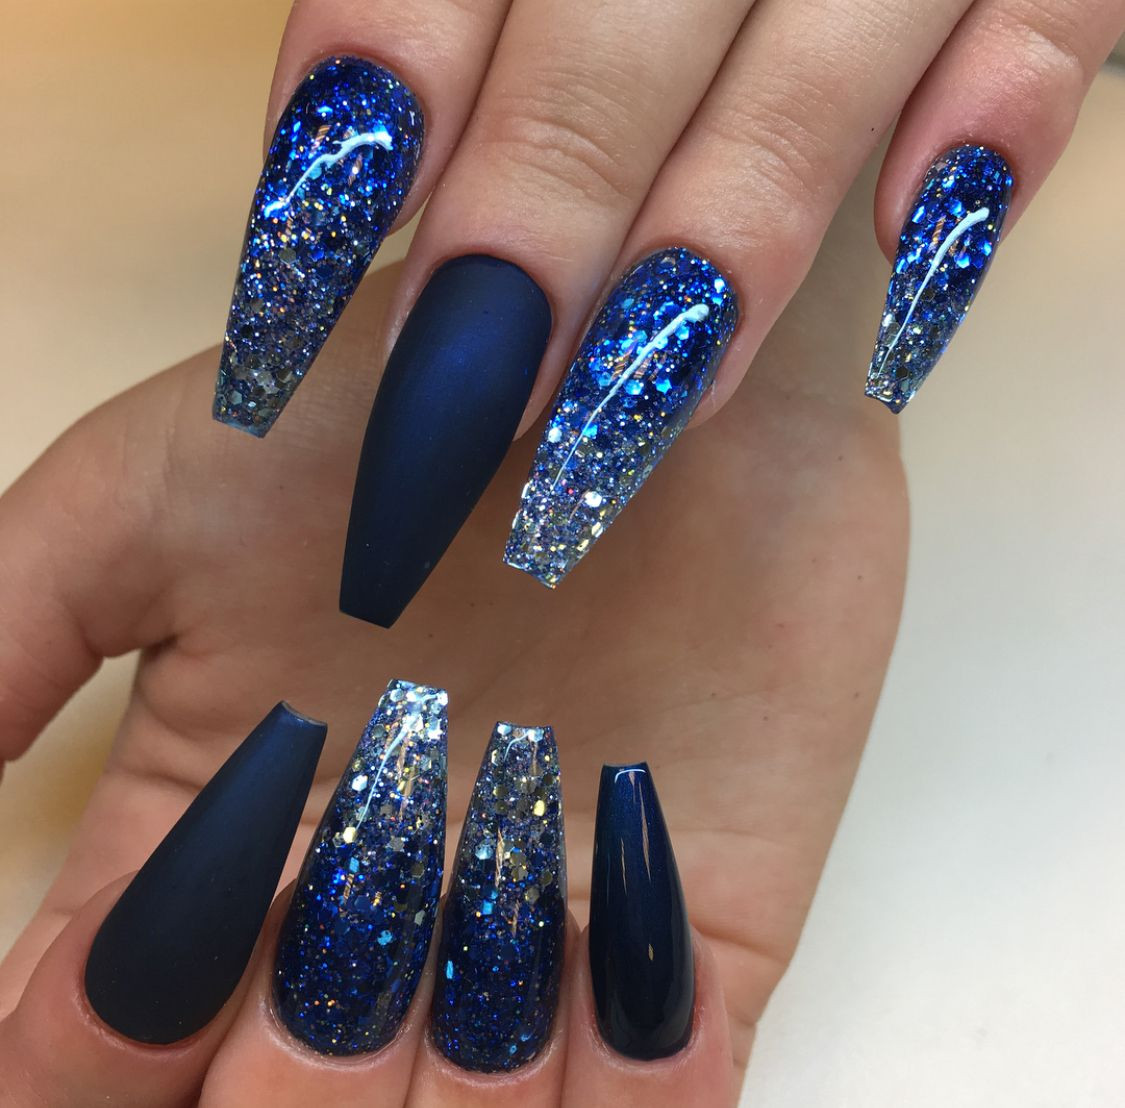 Blue Glitter Acrylic Nails
 pin shesoglorious N A I L $ ♥ in 2019